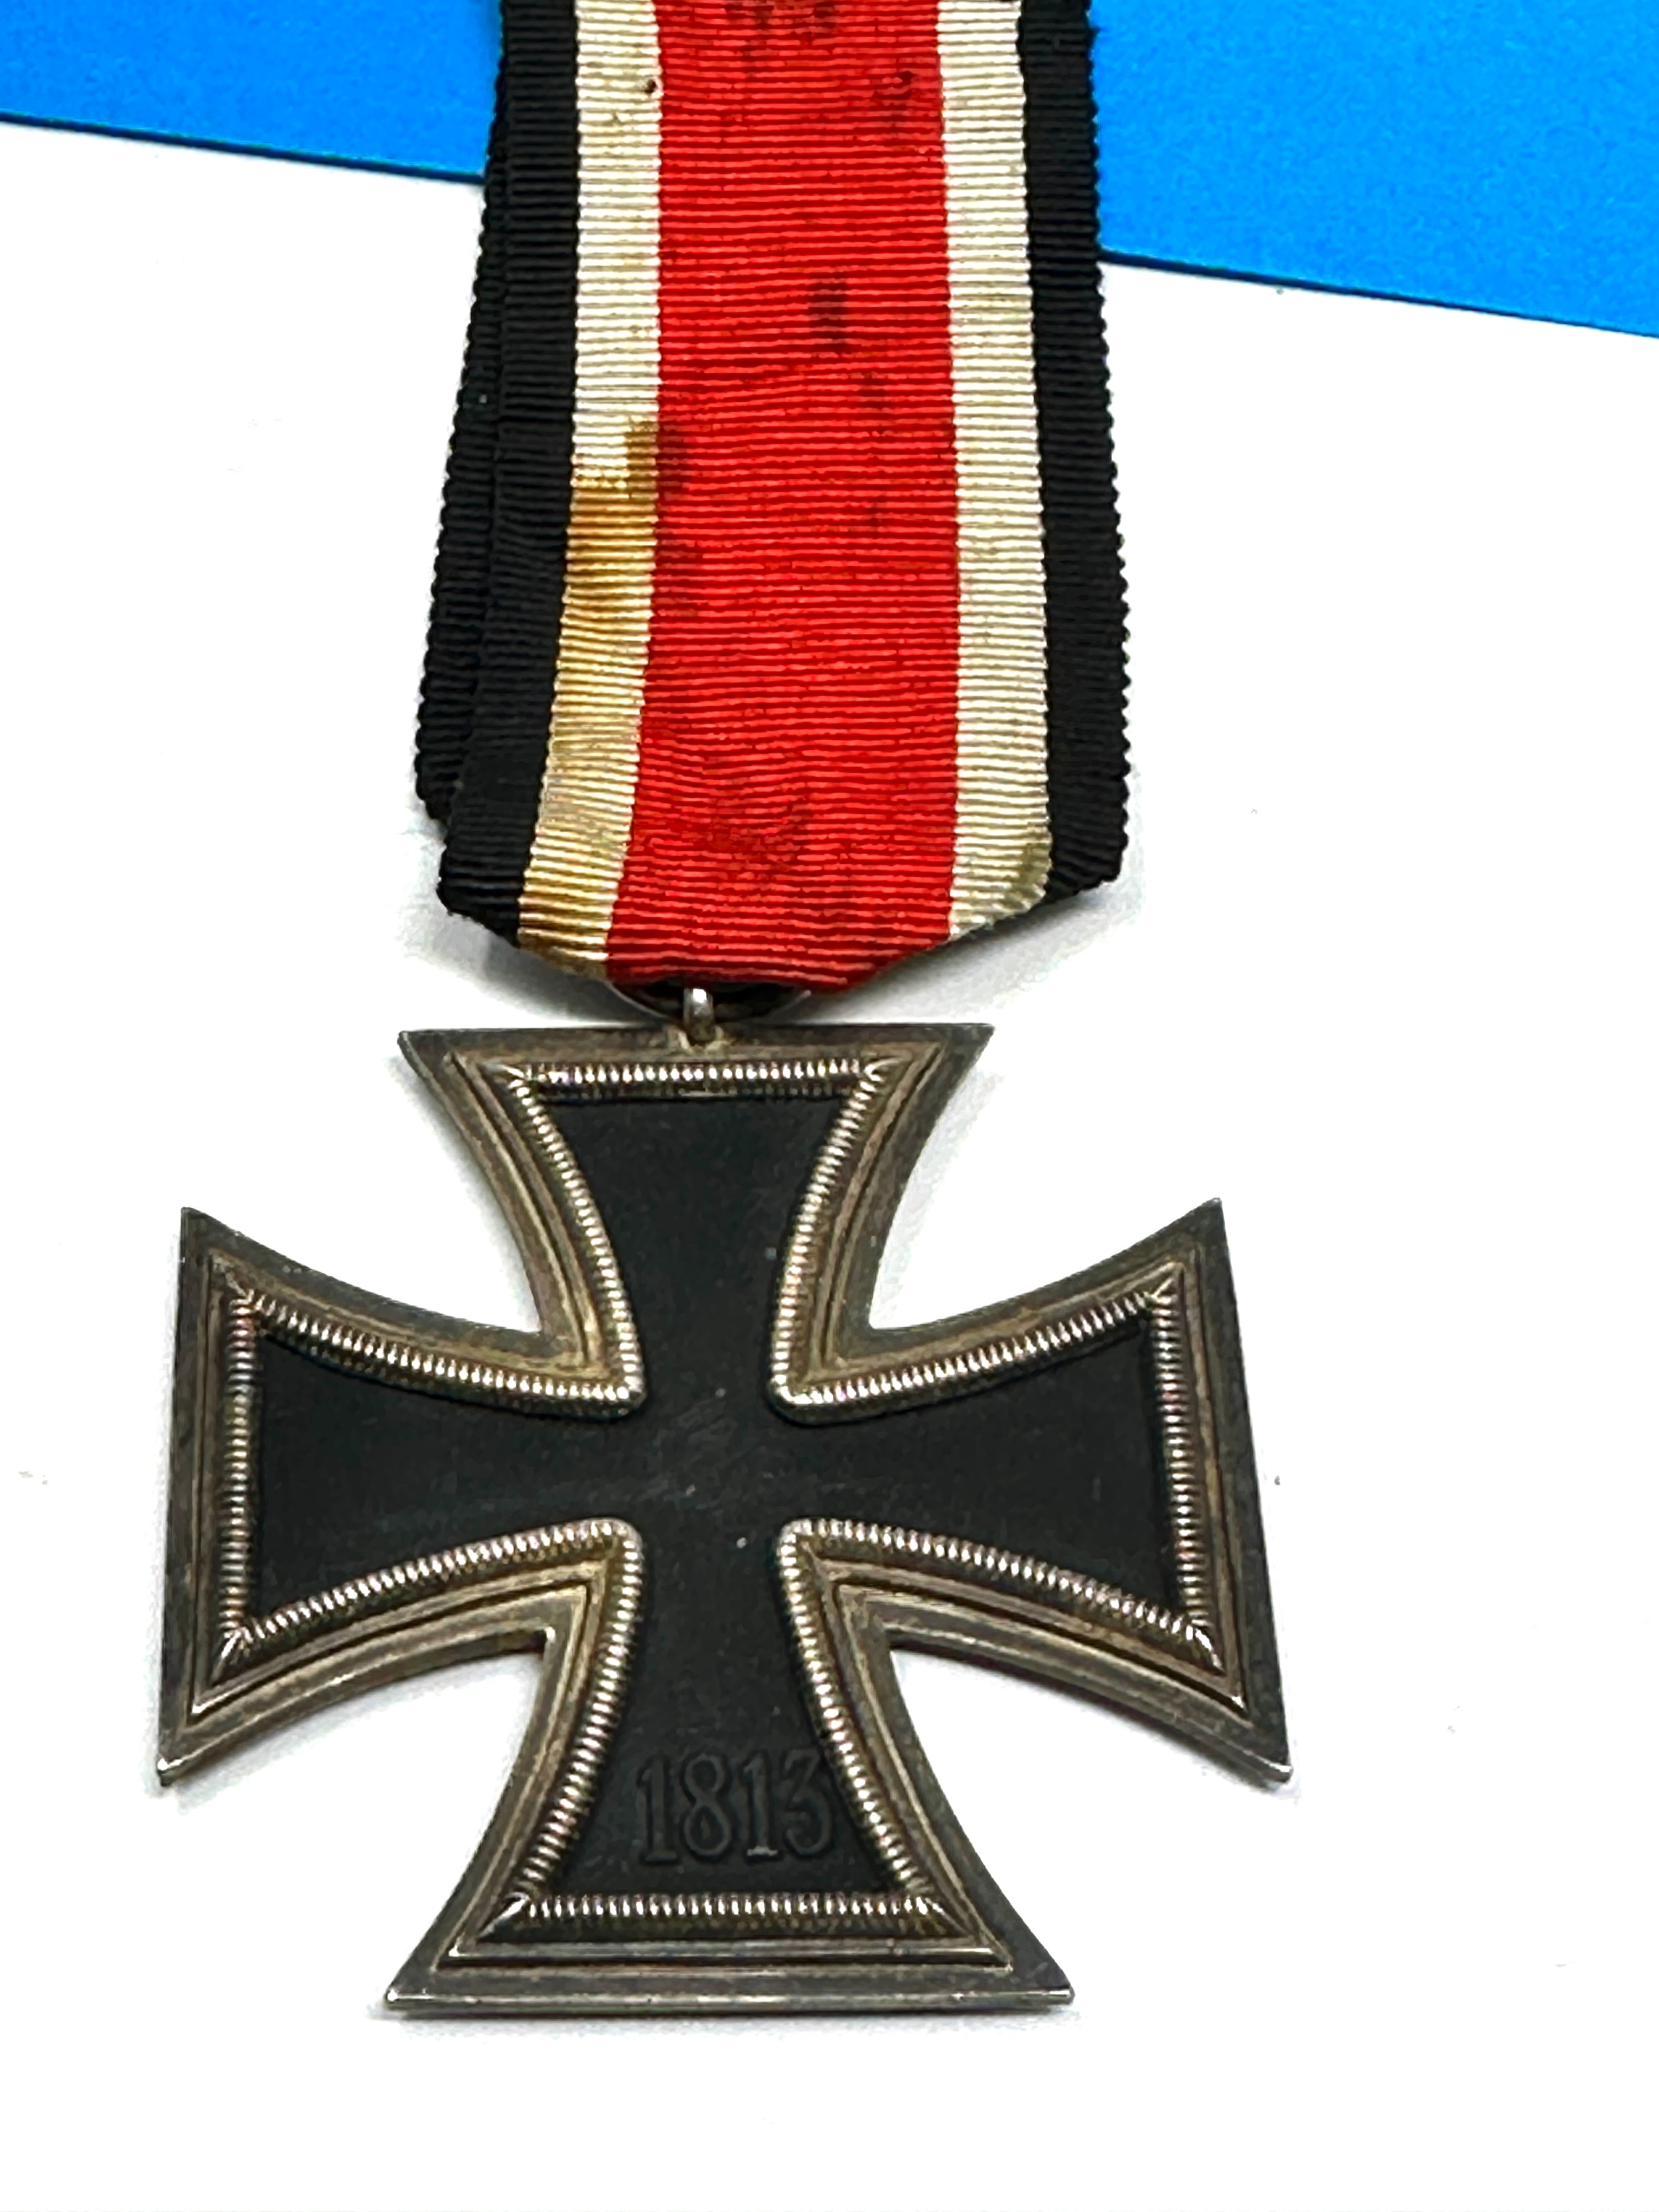 ww2 German iron cross 2nd class no ring stamp - Image 3 of 3